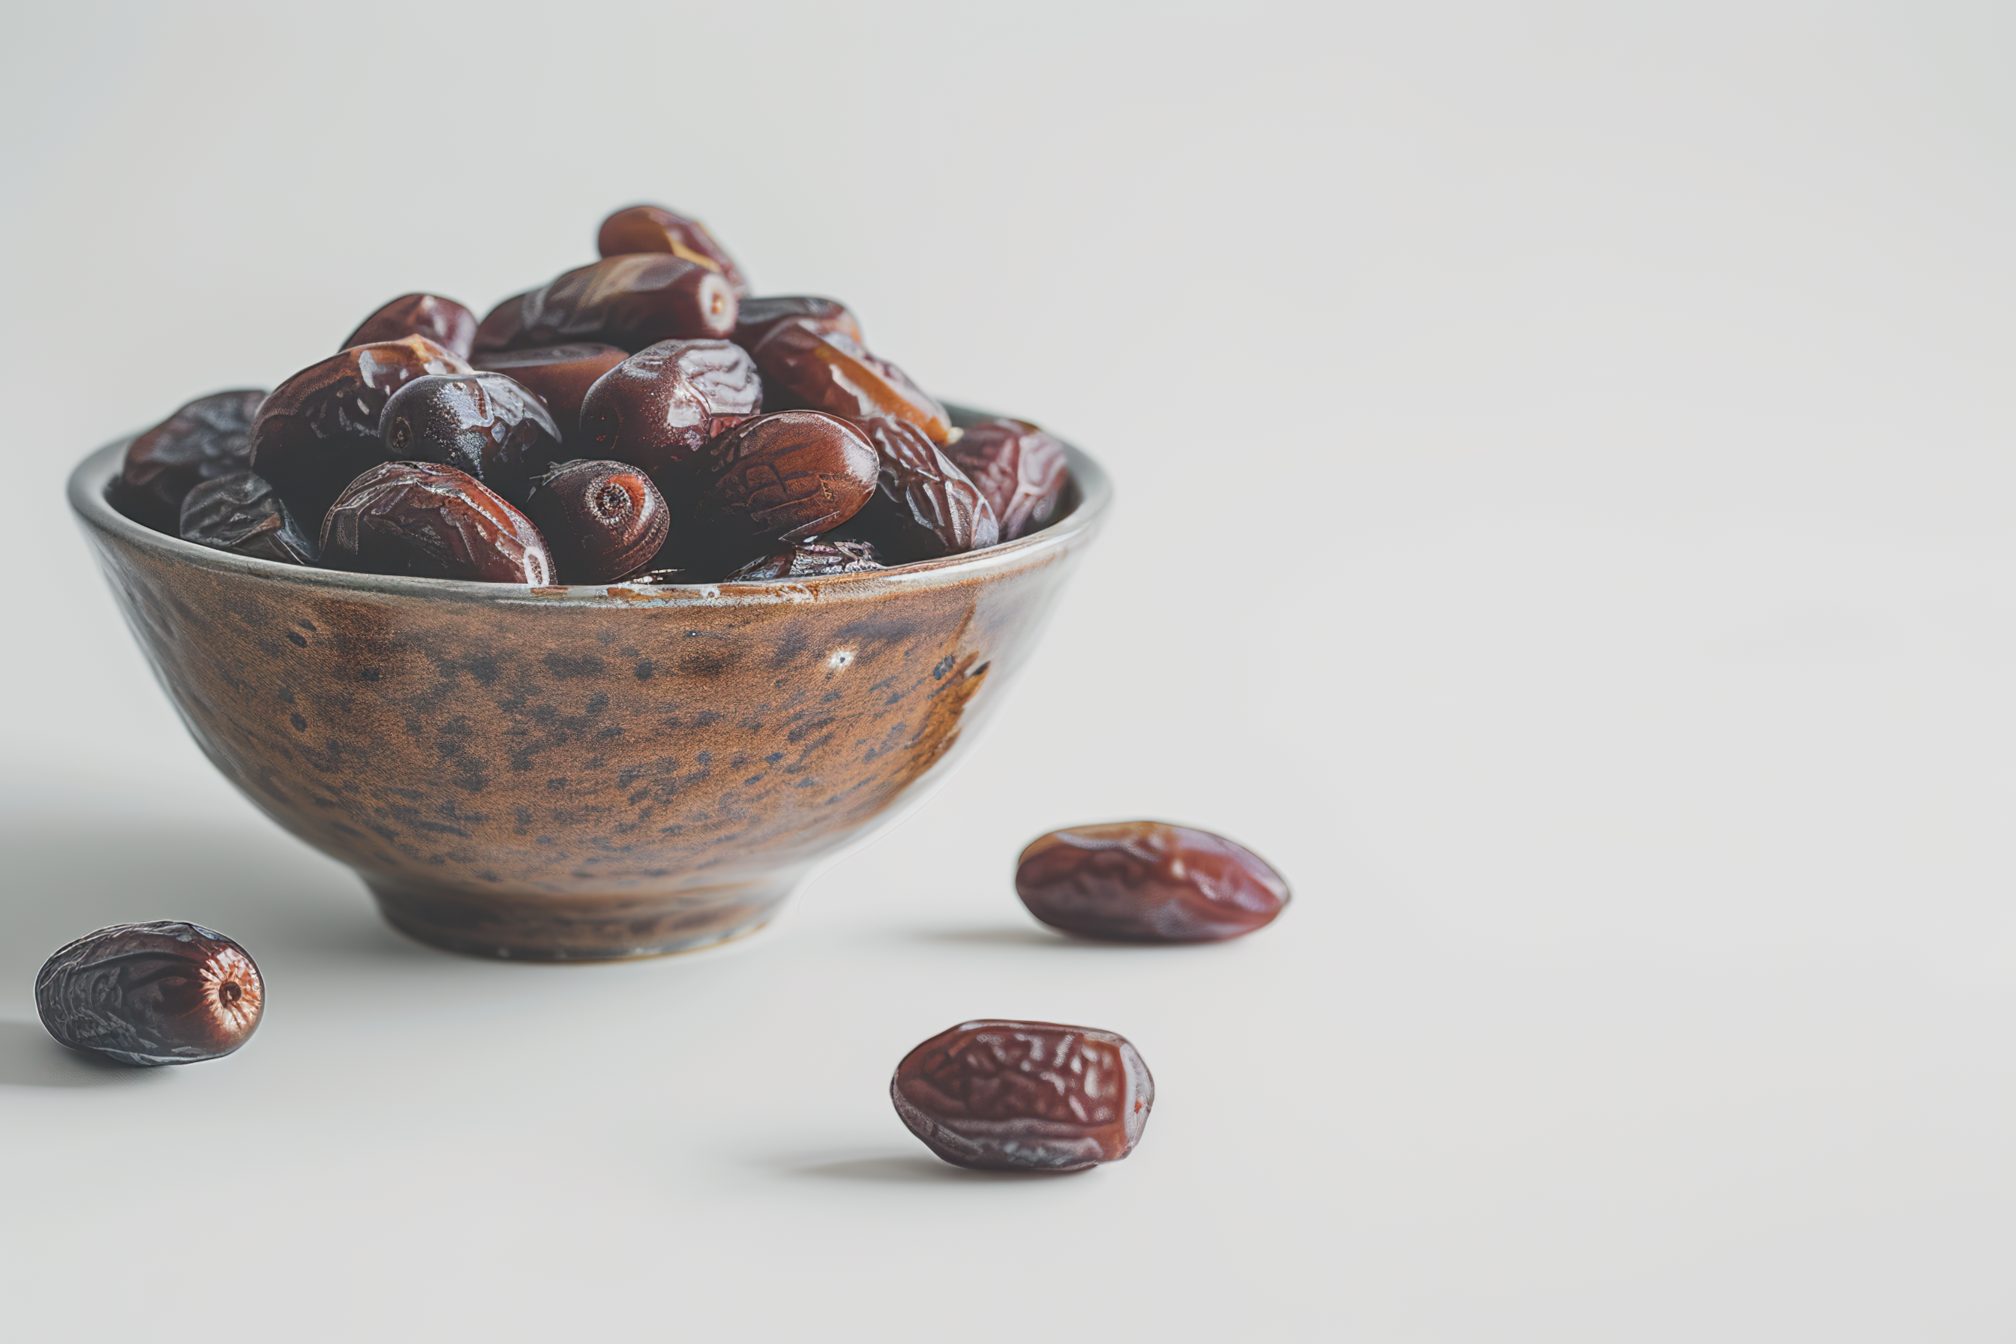 A bowl full of dates on white background